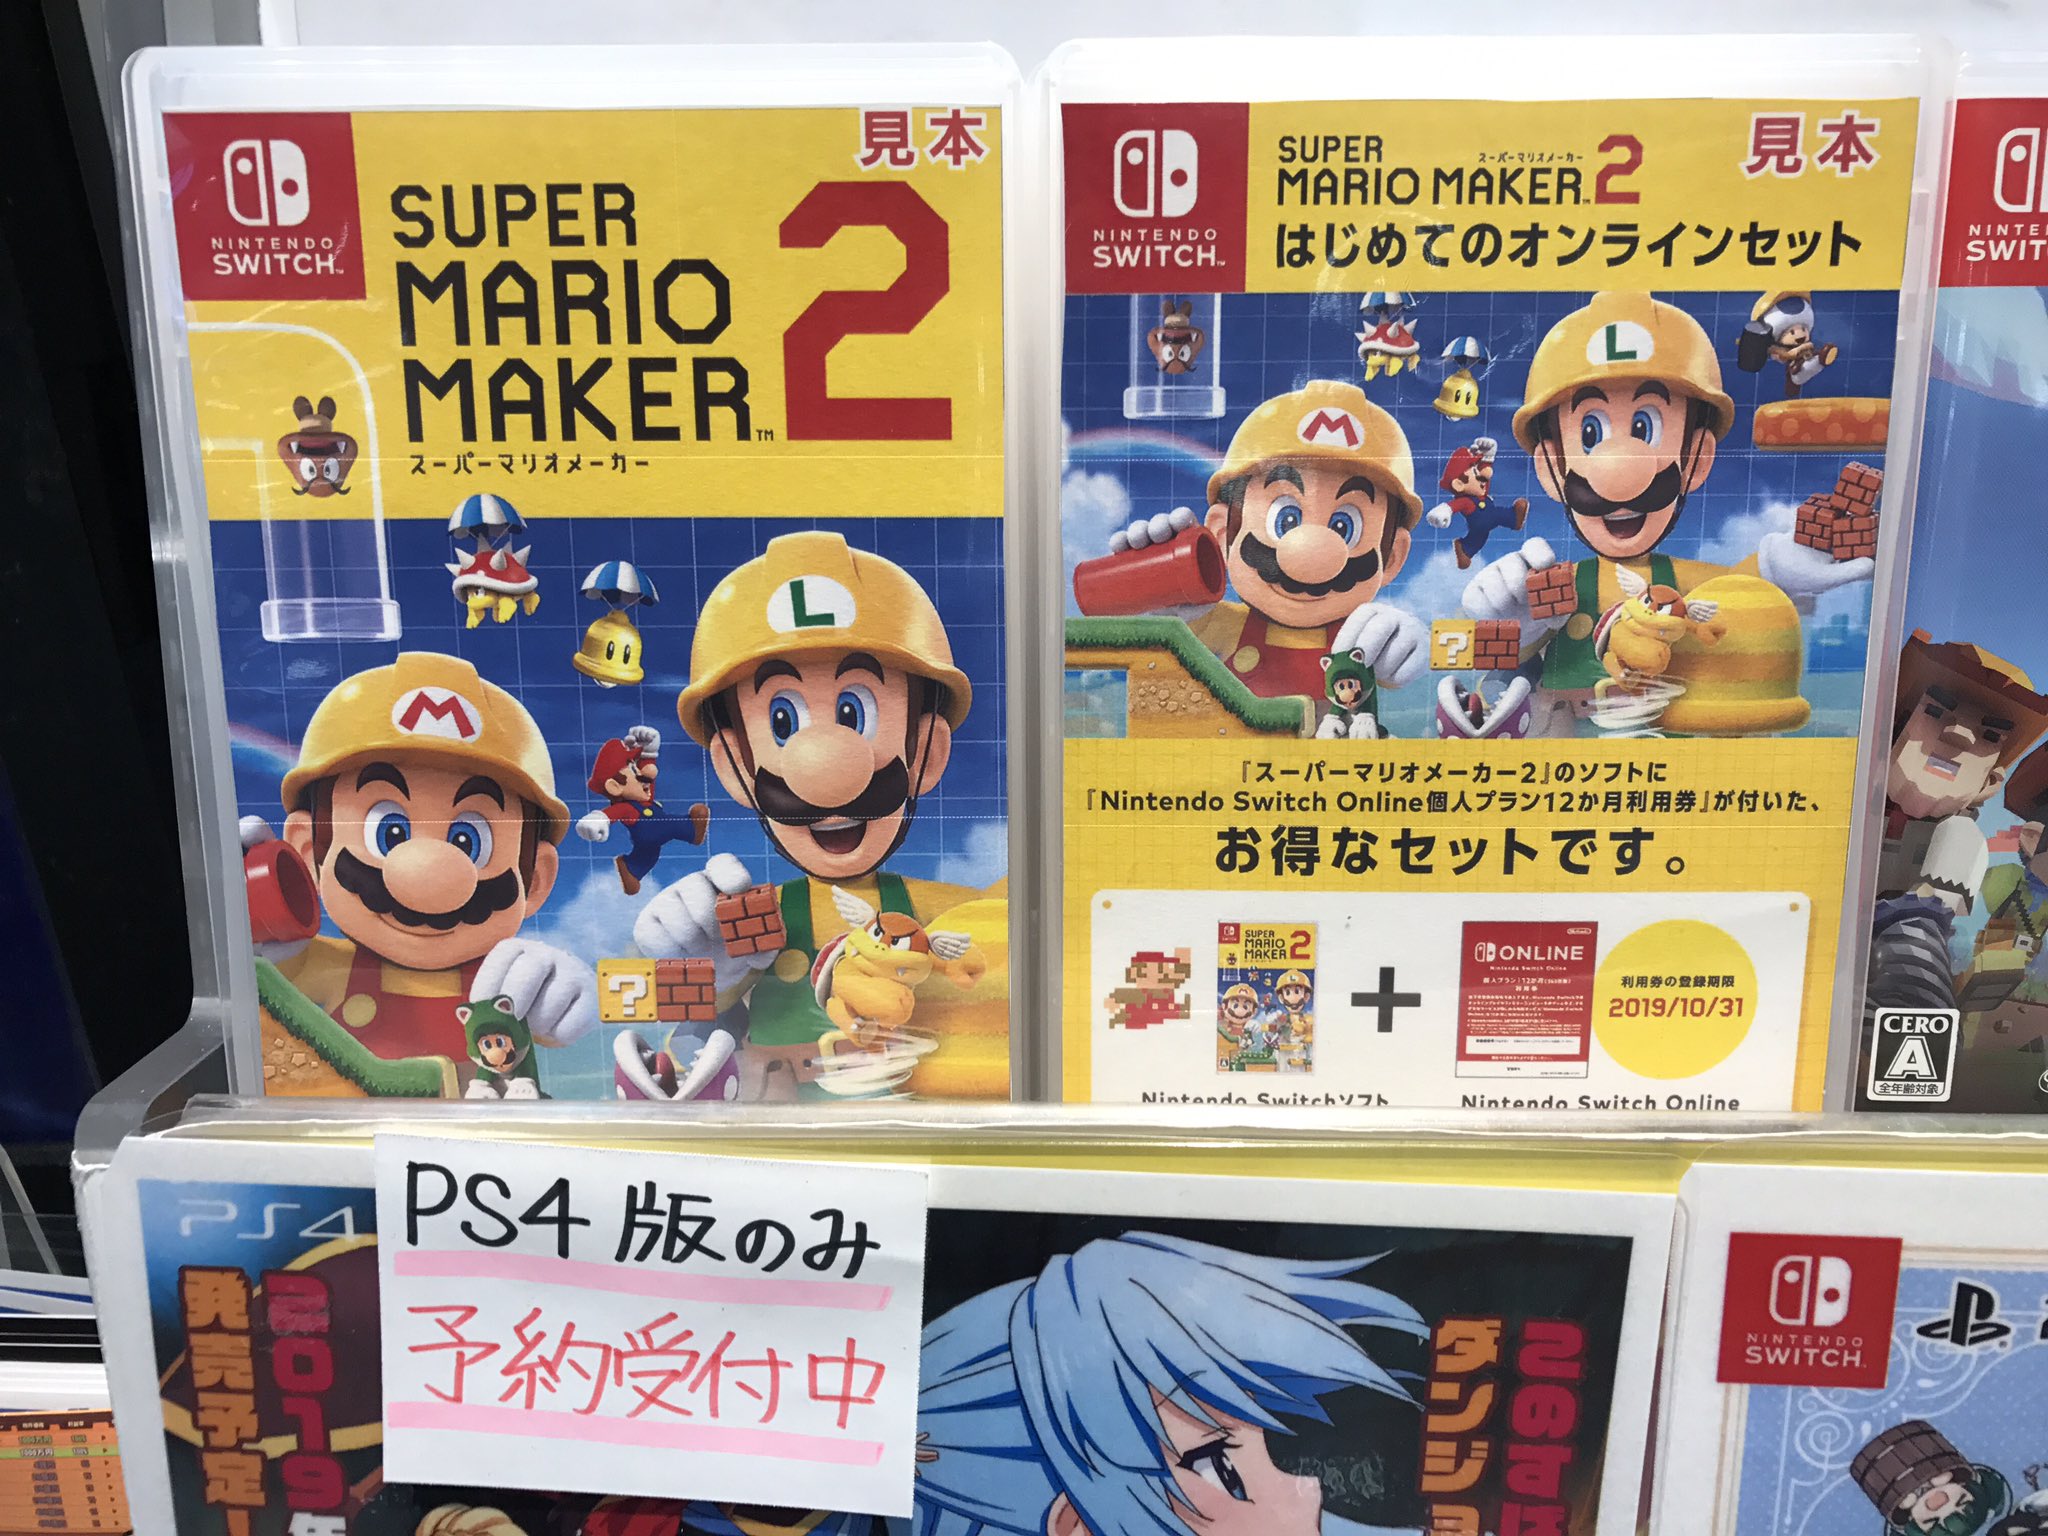 unse kolbøtte nul Cheesemeister 😷💉💉💉💉 on Twitter: "Super Mario Maker 2 pre-orders are  up. The sign below it says PS4 version only. https://t.co/jXPaAwg6YK" /  Twitter